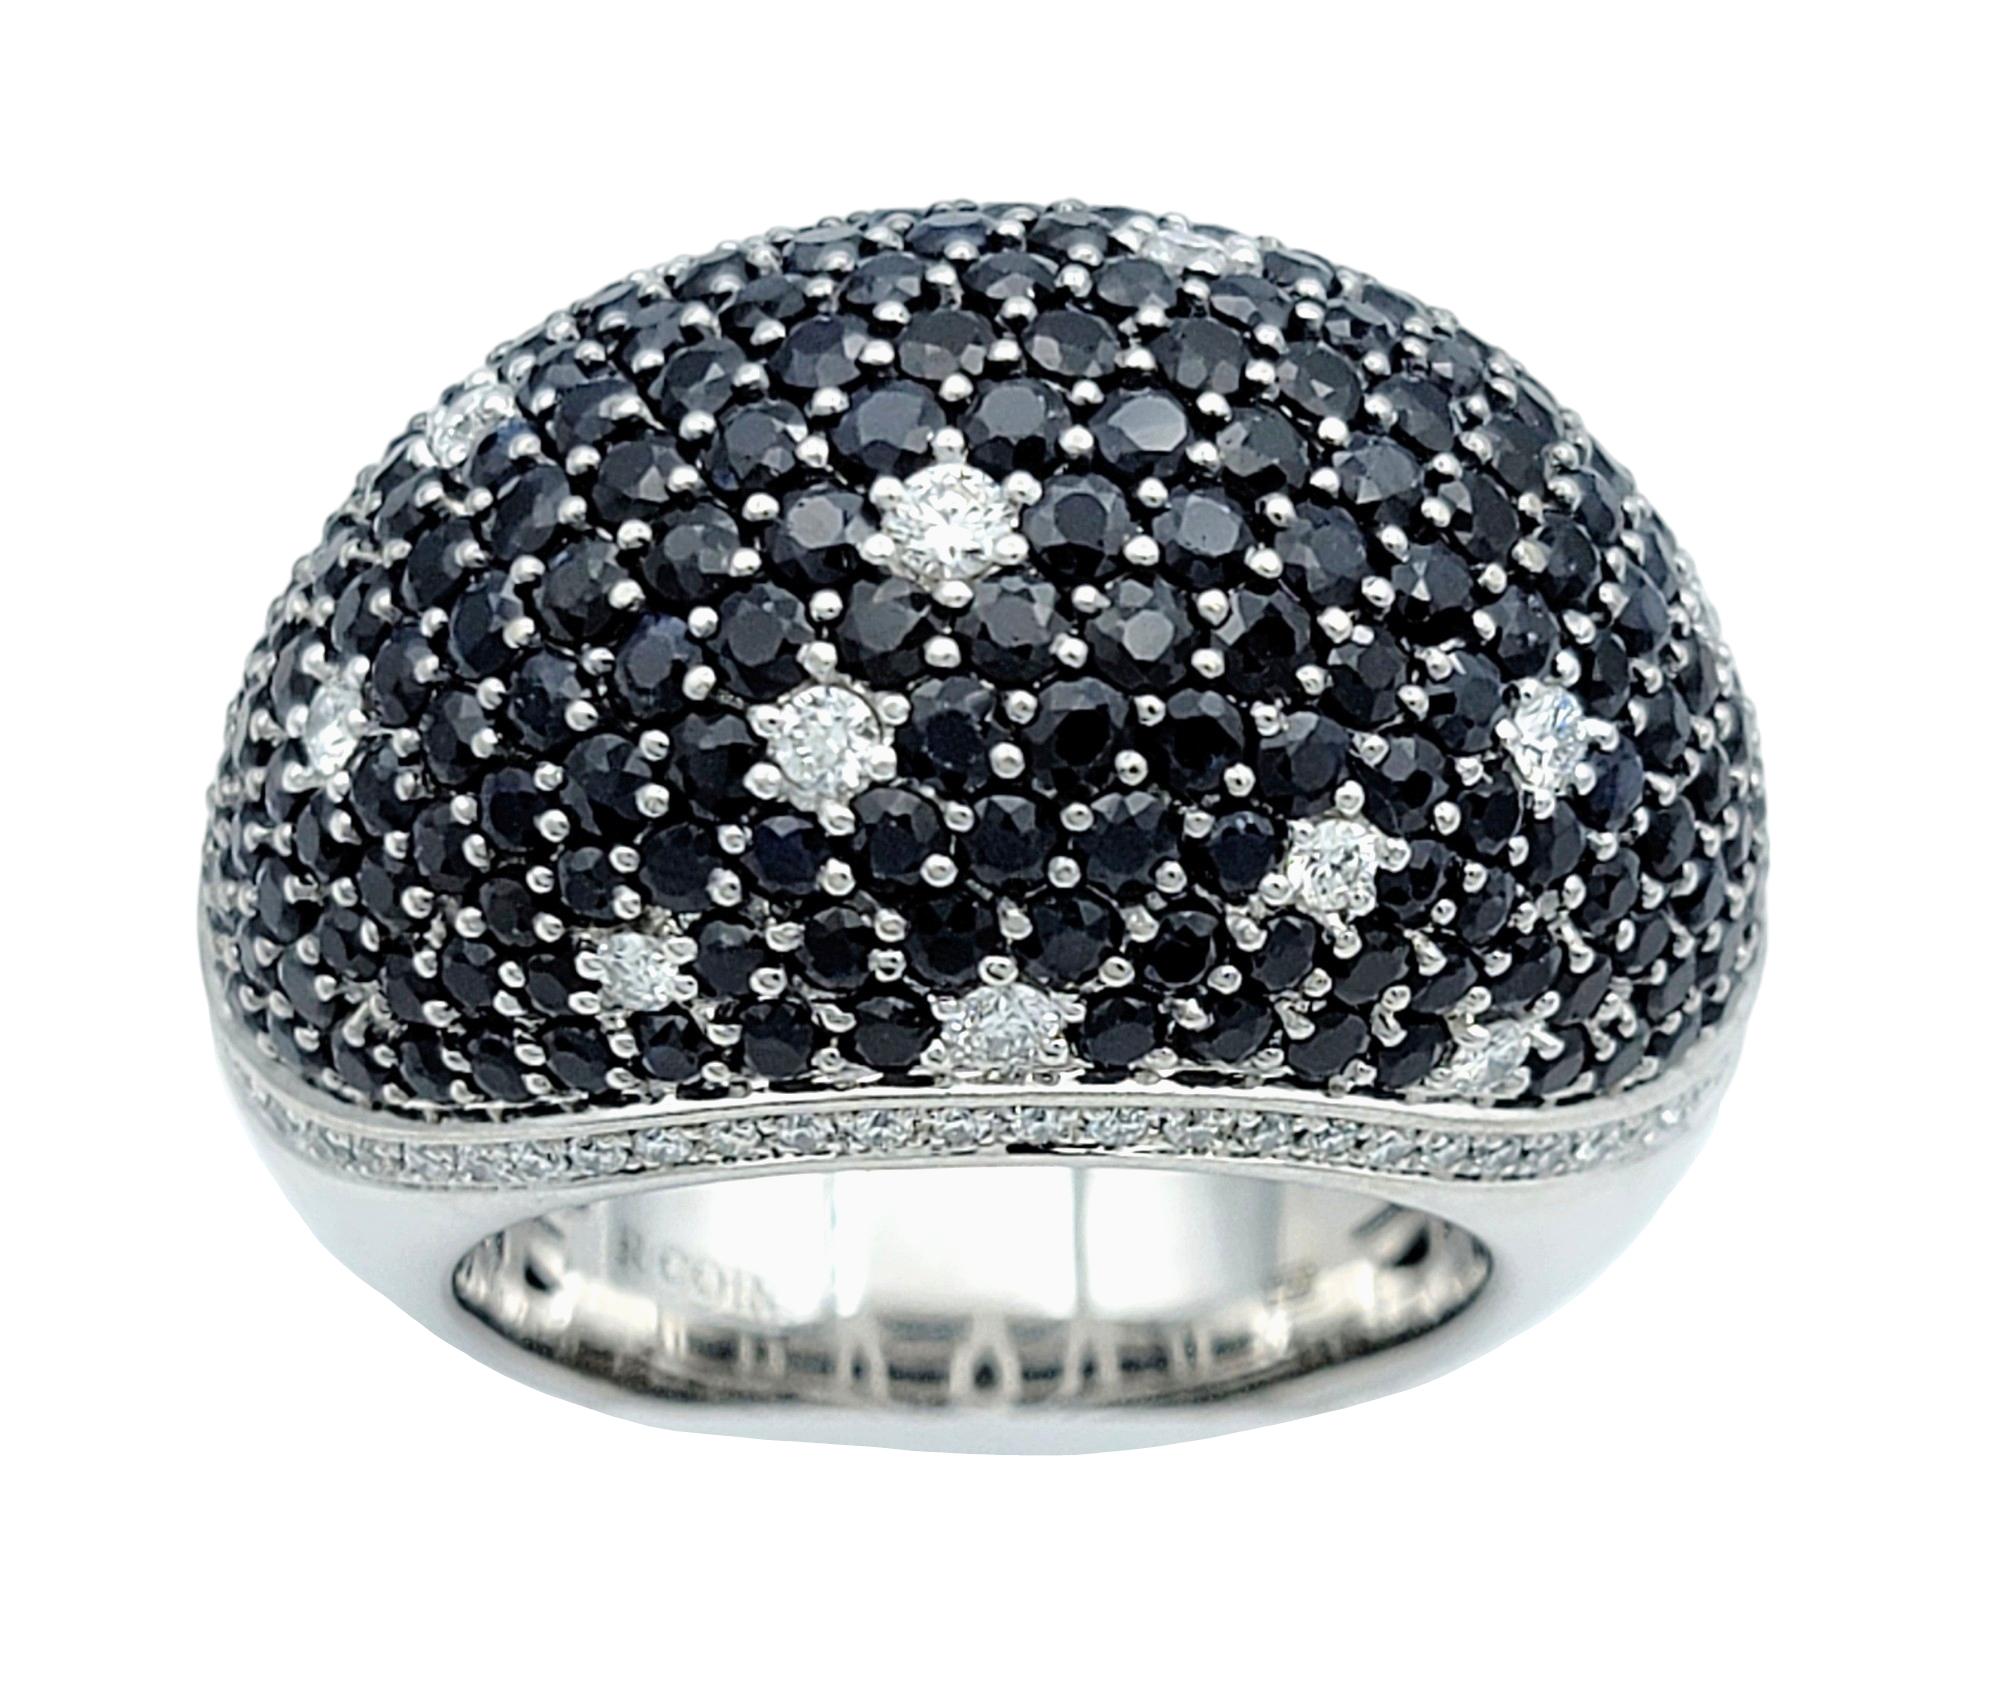 Ring Size: 7.5

This Roberto Coin Fantasia dome ring exudes luxury and sophistication with its captivating design. Crafted in 18 karat white gold, the ring features a stunning array of vibrant blue sapphires and dazzling diamonds arranged in a